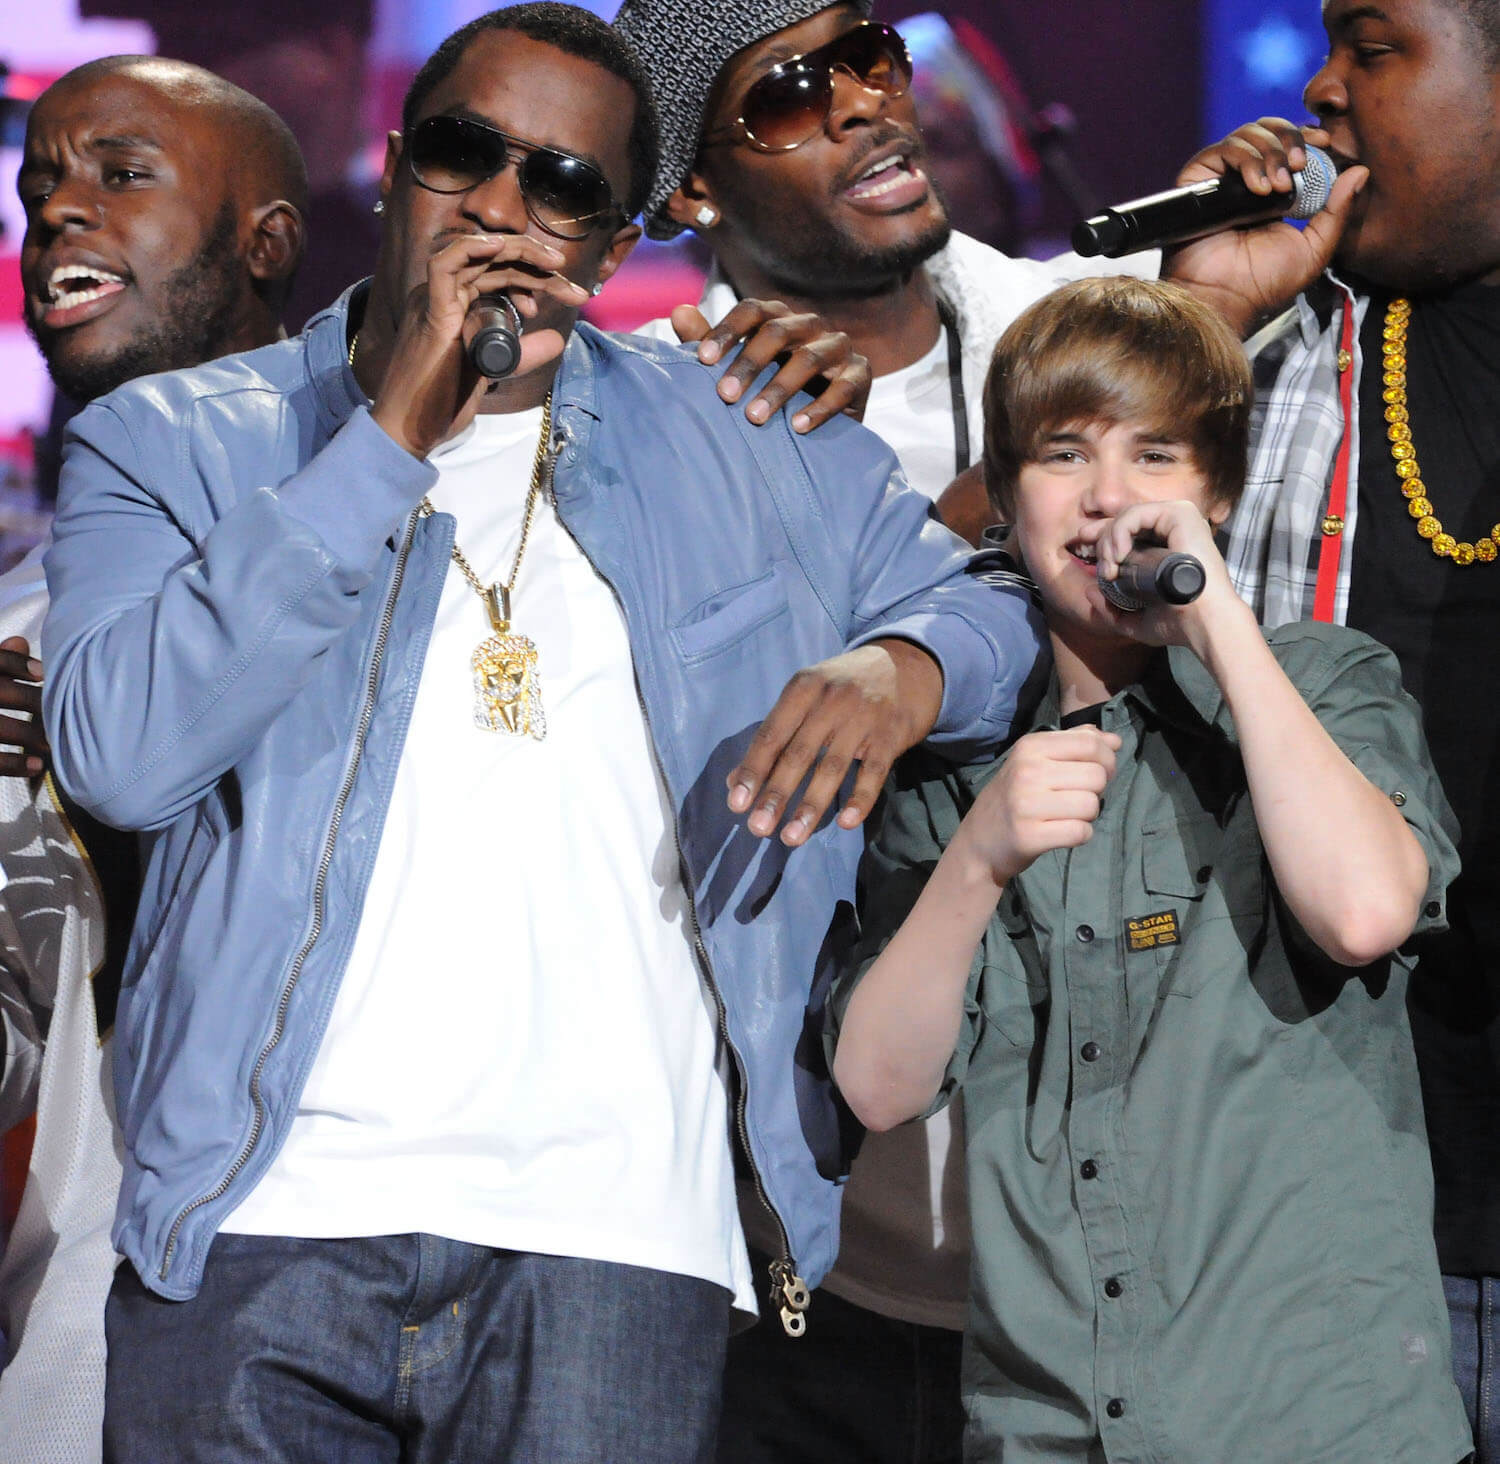 Sean 'P. Diddy' Combs, Justin Bieber, Sean Kingston, and Chris Brown on stage holding microphones to their mouths during a benefit concert in 2010